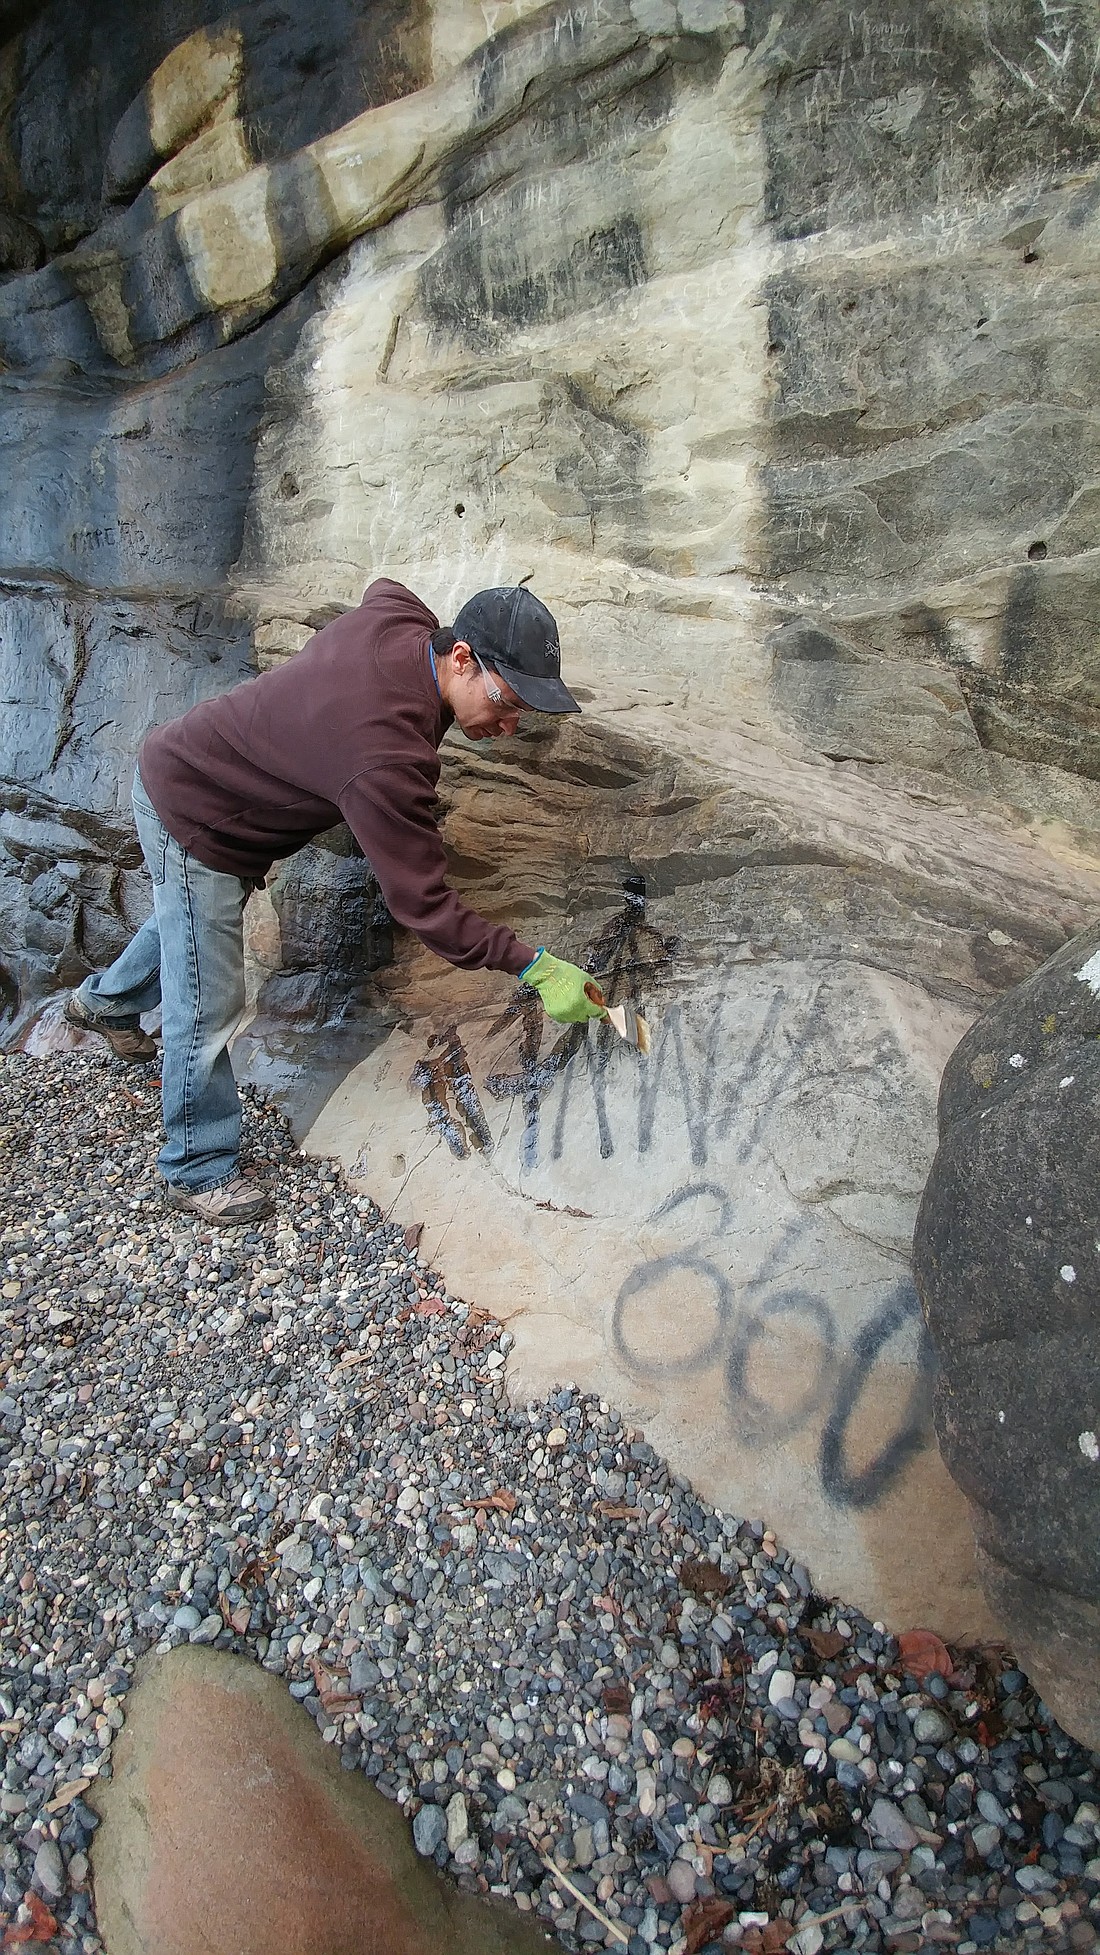 A worker with the Access Fund cleans up graffiti at Larrabee State Park in 2017.